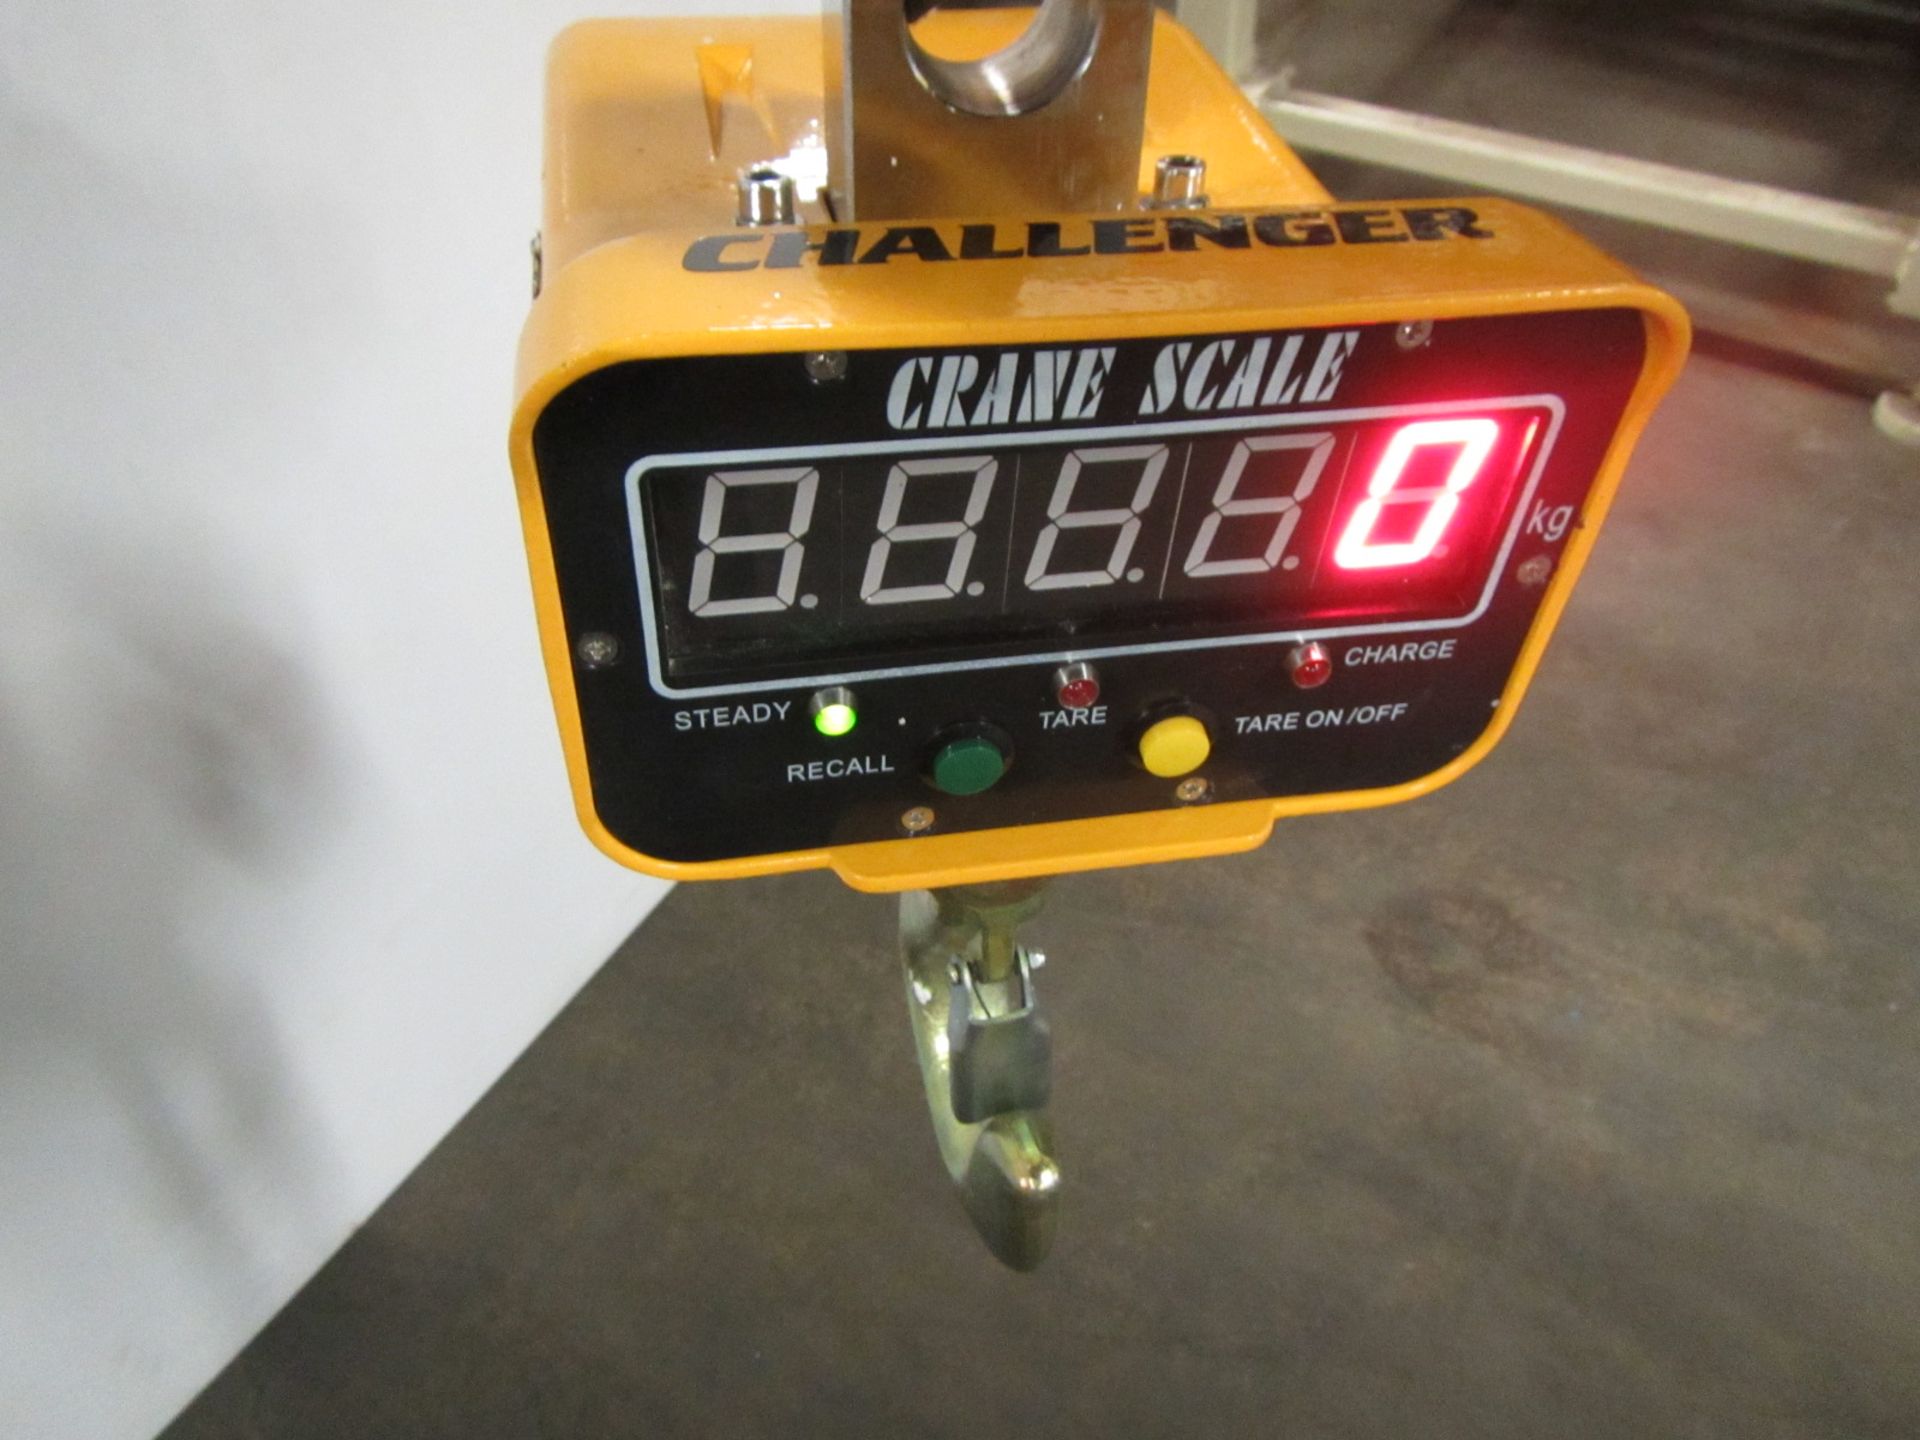 Challenger MINT Digital Crane Scale 10,000lbs 5 ton Capacity - complete with remote control and - Image 3 of 3